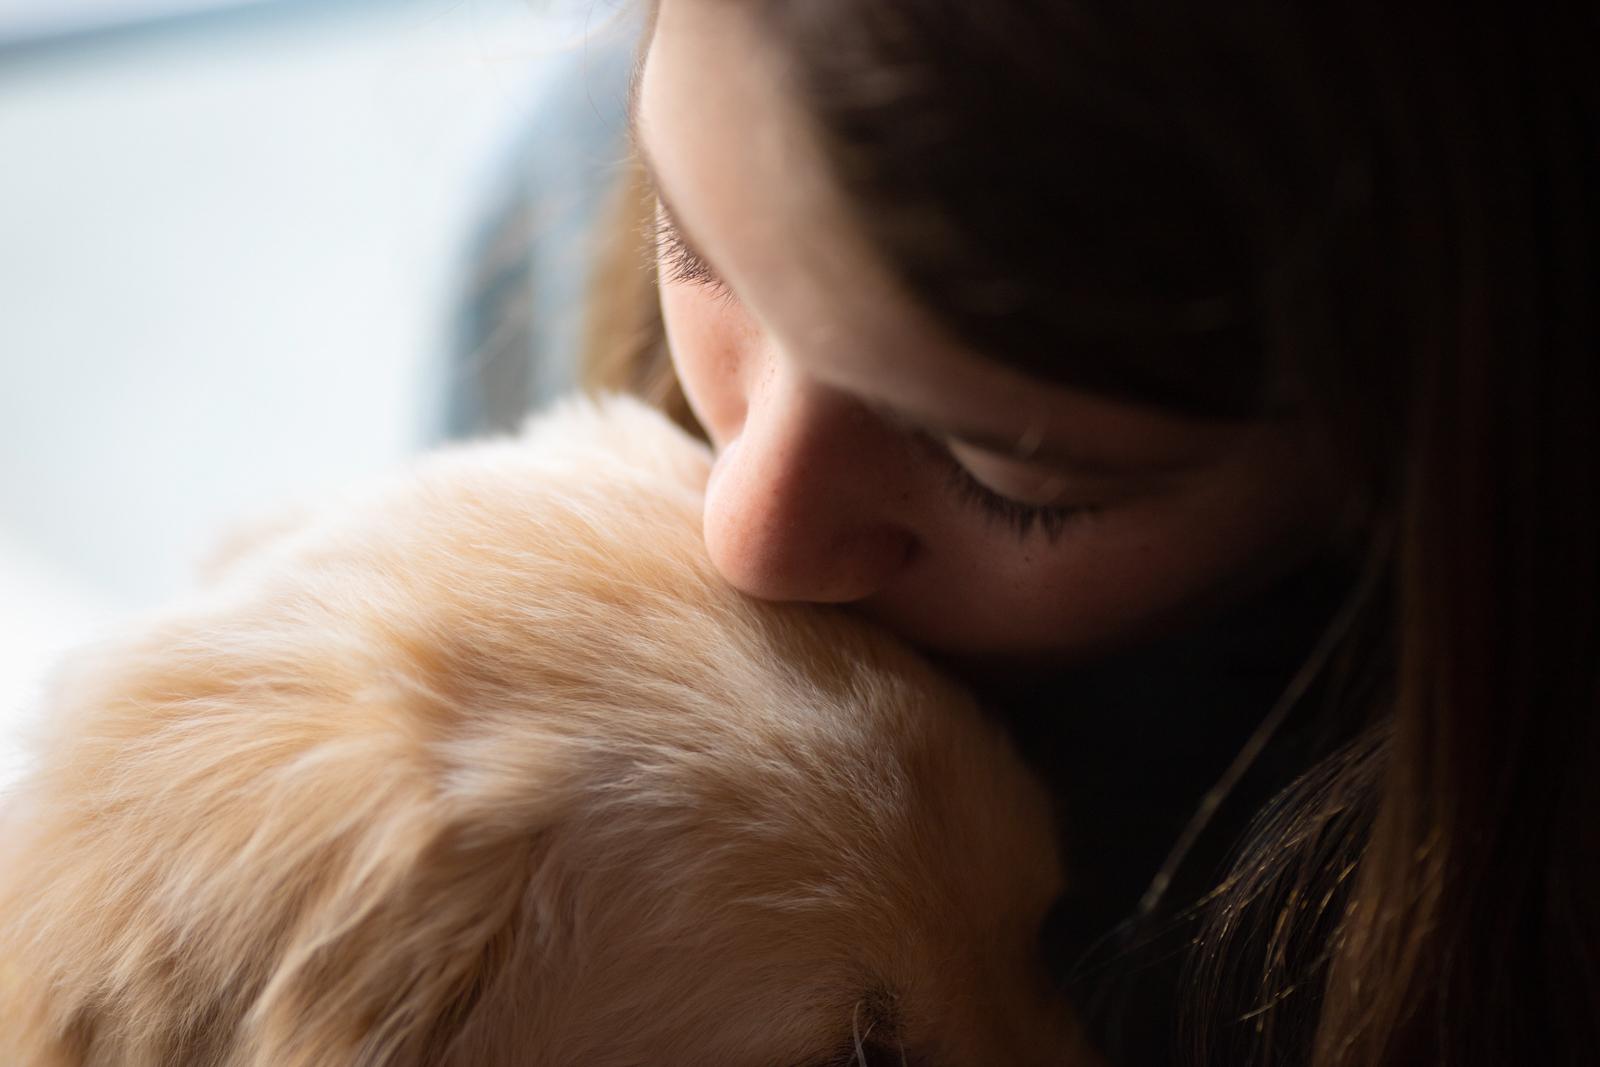 Akron, Ohio: Leah Habel kisses her golden retriever puppy, Bleu, on the top of his head in her home in Akron, Ohio. Bleu joined the Habel household during the peak of the COVID-19 pandemic. "He kept me company during a time when no one else could," says Habel. 